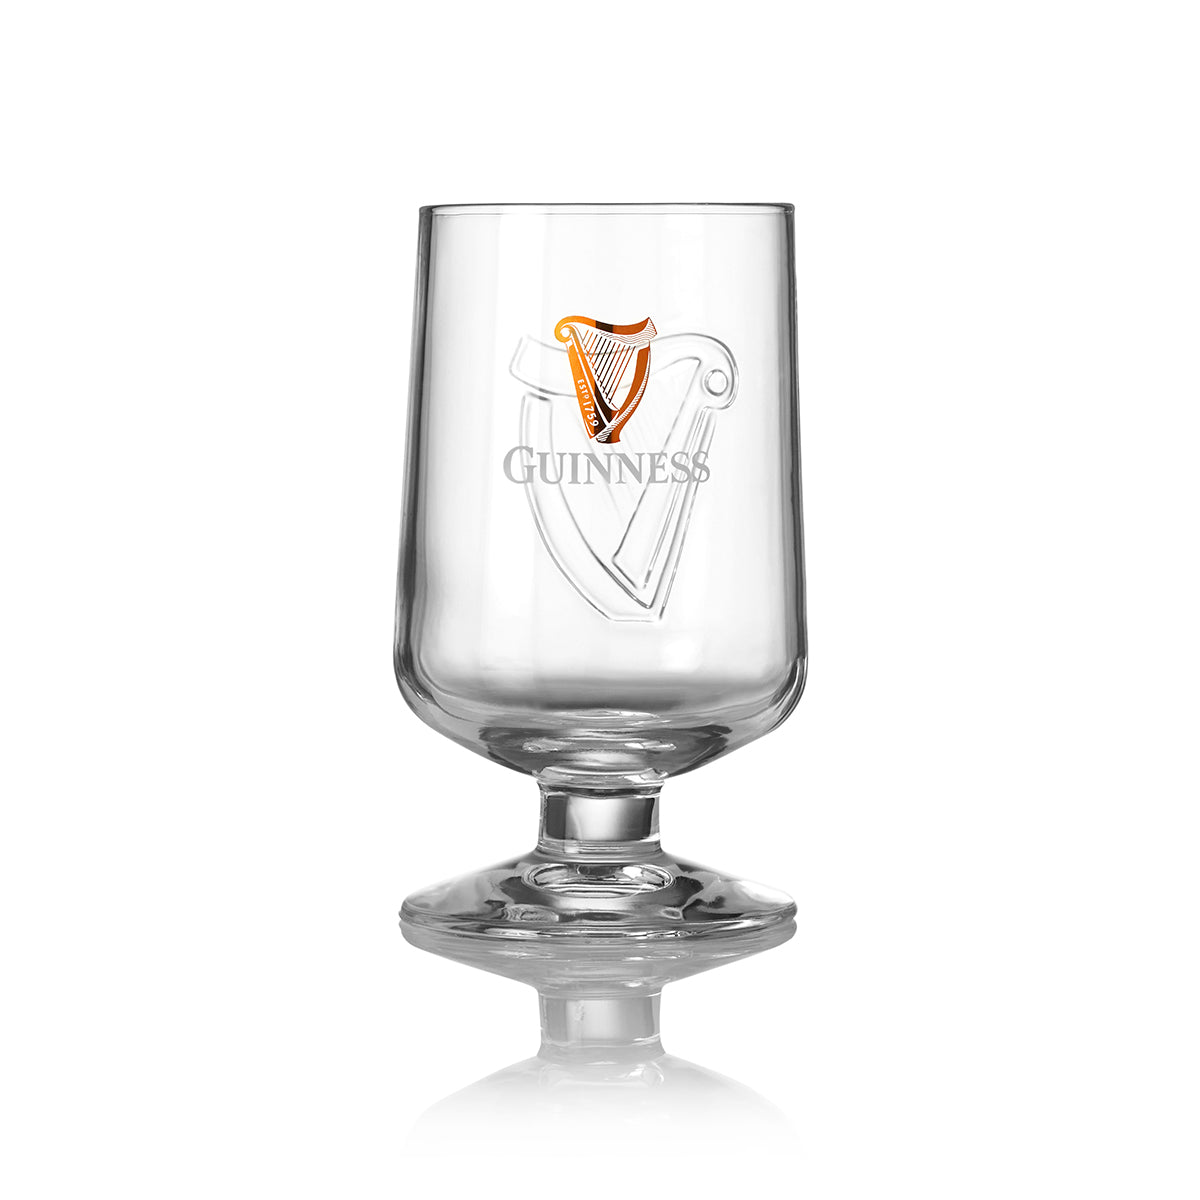 A Guinness Embossed Stem Glass 420ml - 6 Pack featuring the iconic Harp logo on a clean white background by Guinness UK.